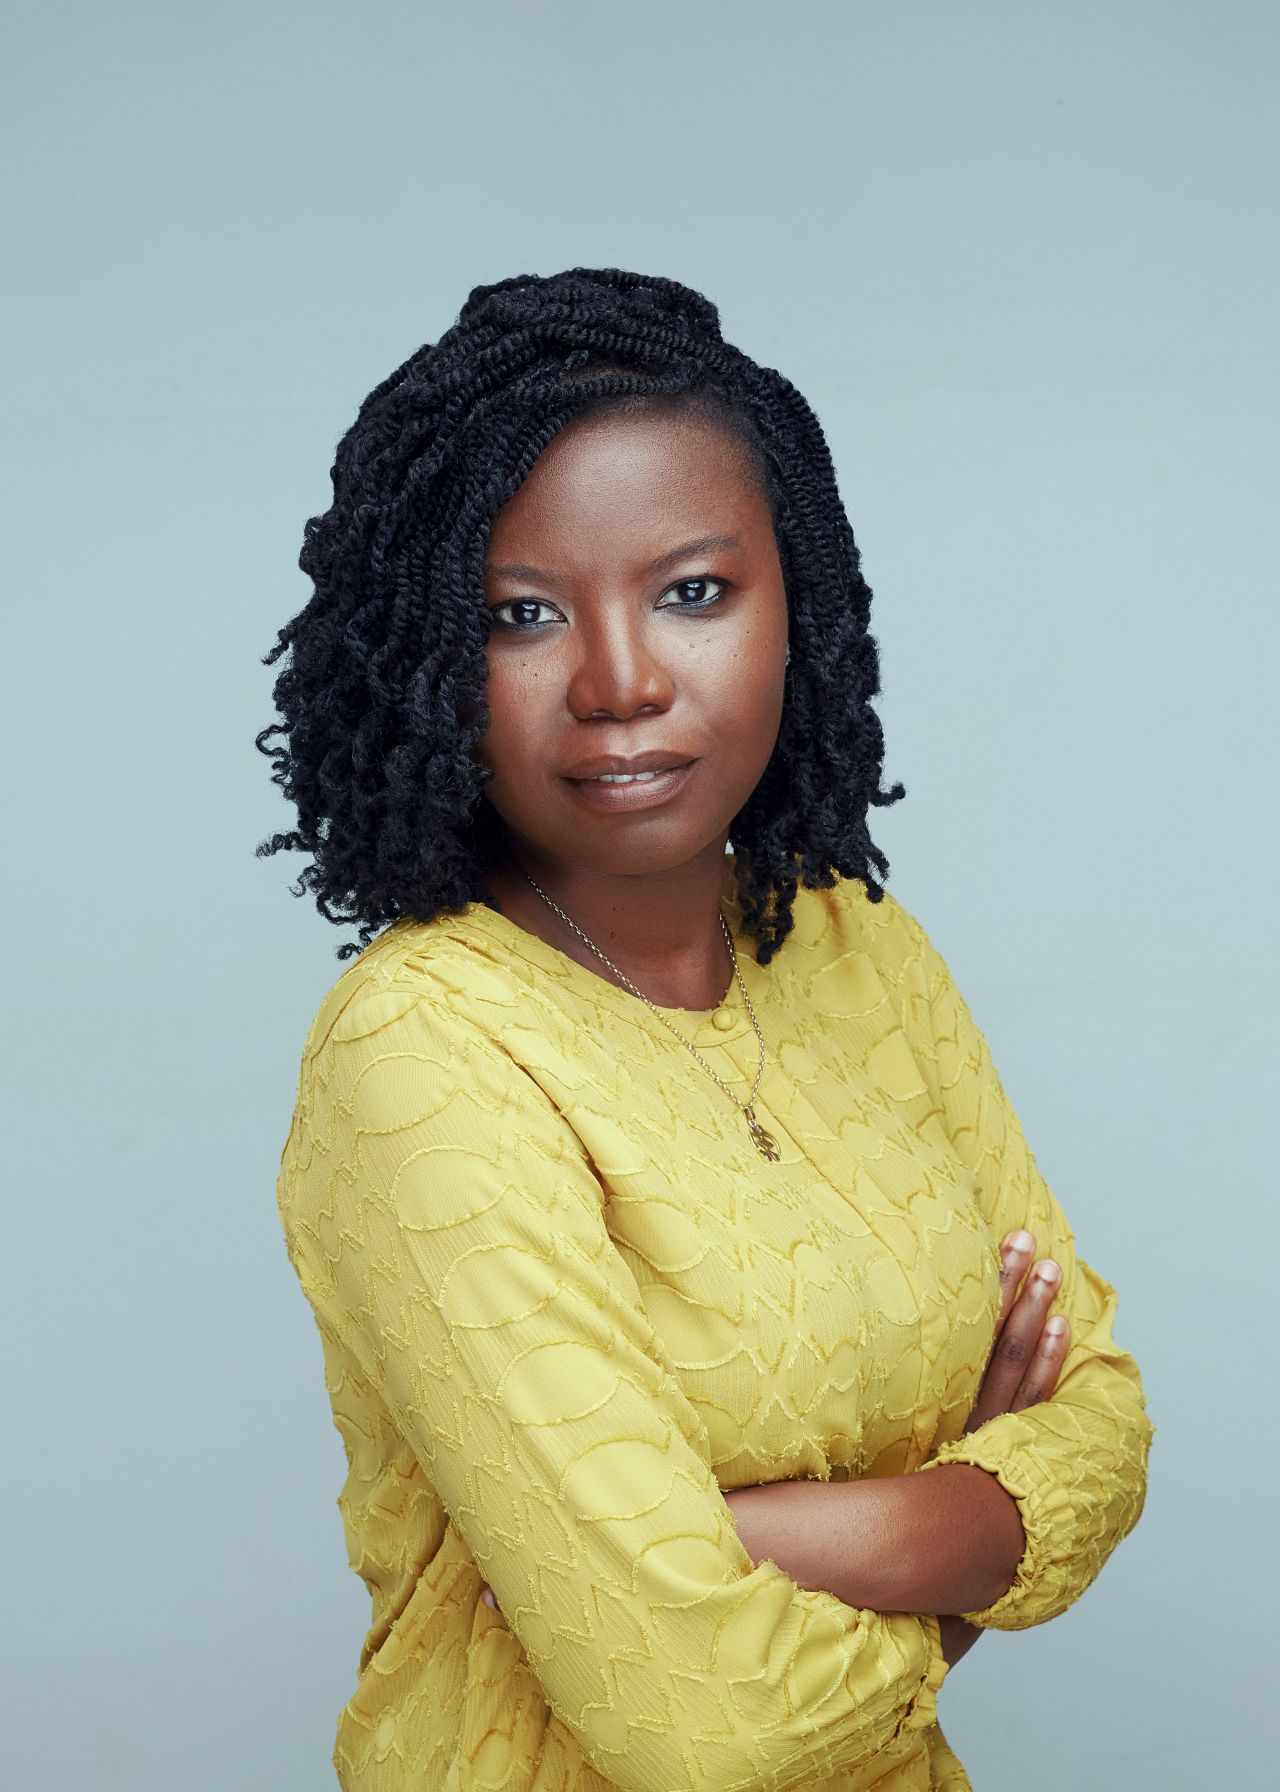 Born in Liberia, Ghanaian <strong>Peace Adzo Medie</strong> is an academic who has written fiction and non-fiction. Her debut novel "His Only Wife" was published in 2020 and was named among the New York Times' "100 Notable Books of 2020," and a Time Magazine Must-Read. <br />She is also senior lecturer in Gender and International Politics at the University of Bristol, in the UK.